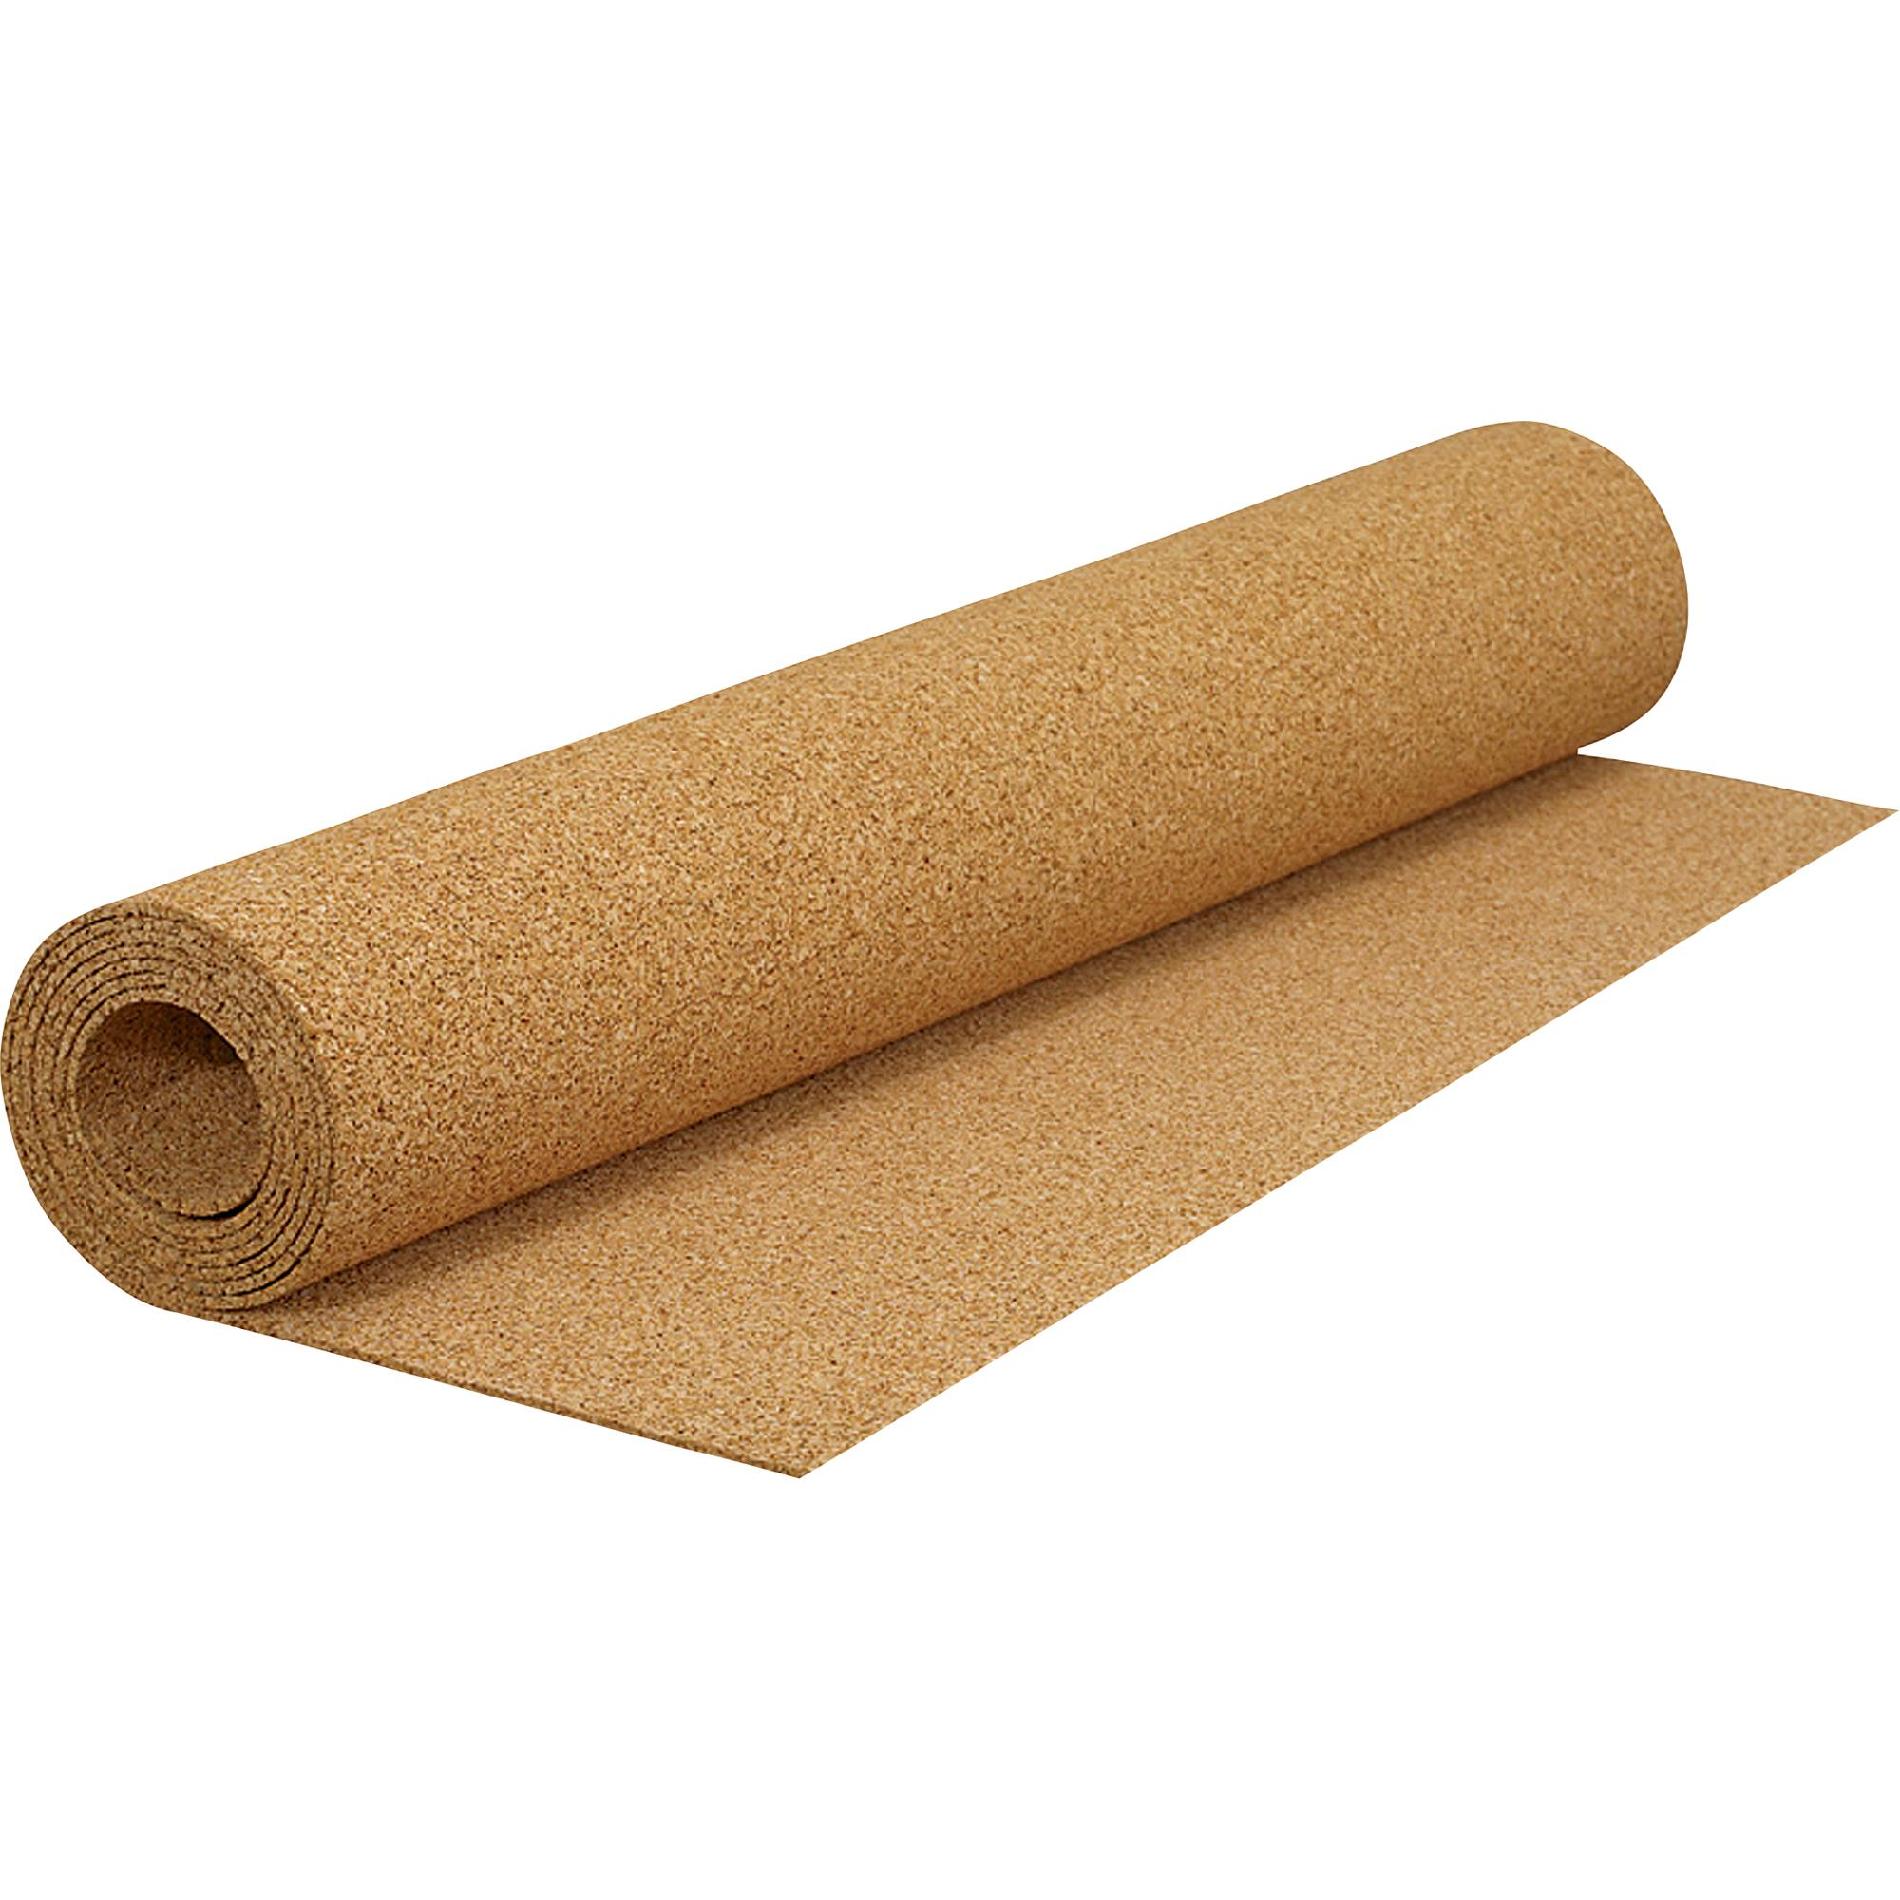 QEP 200 sq. ft. 50 ft. x 4 ft. x 1/4 in. Roll of Cork Underlayment for Tile, Laminate and Floated or Glue-Down Wood Floors